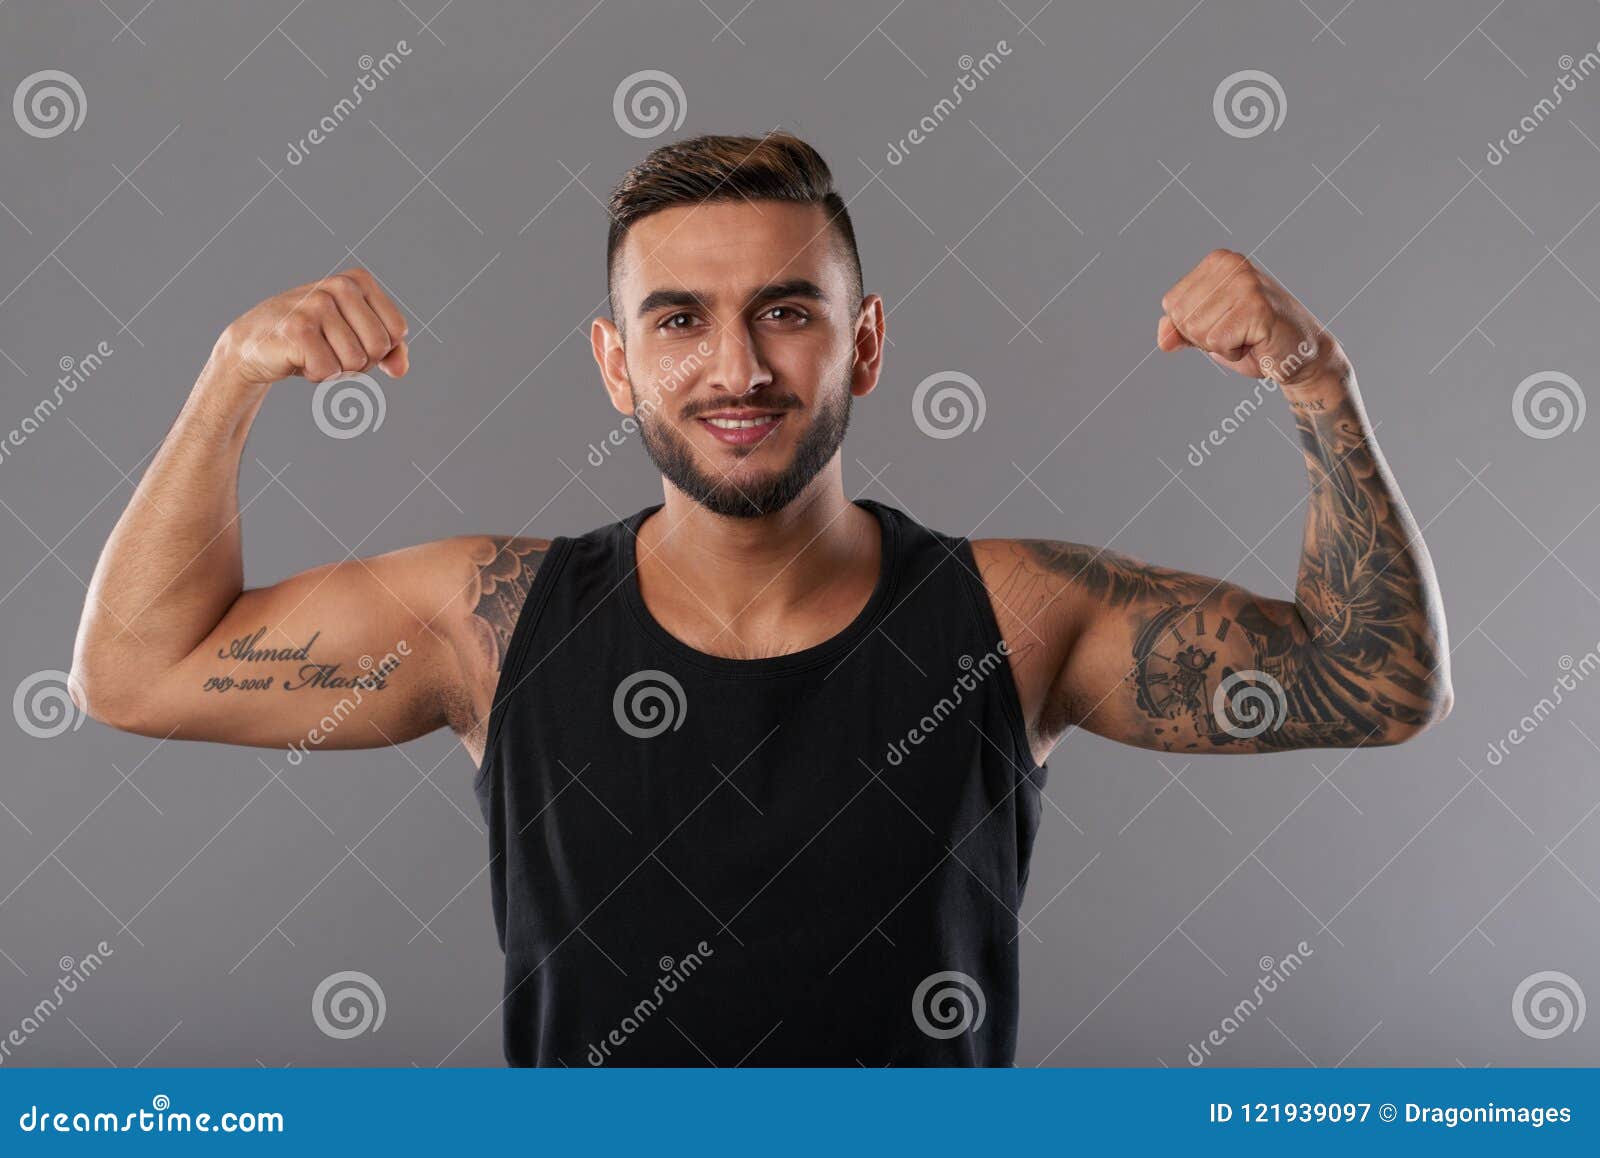 Shirtless Man With Tattoo on Body Flexing His Biceps · Free Stock Photo